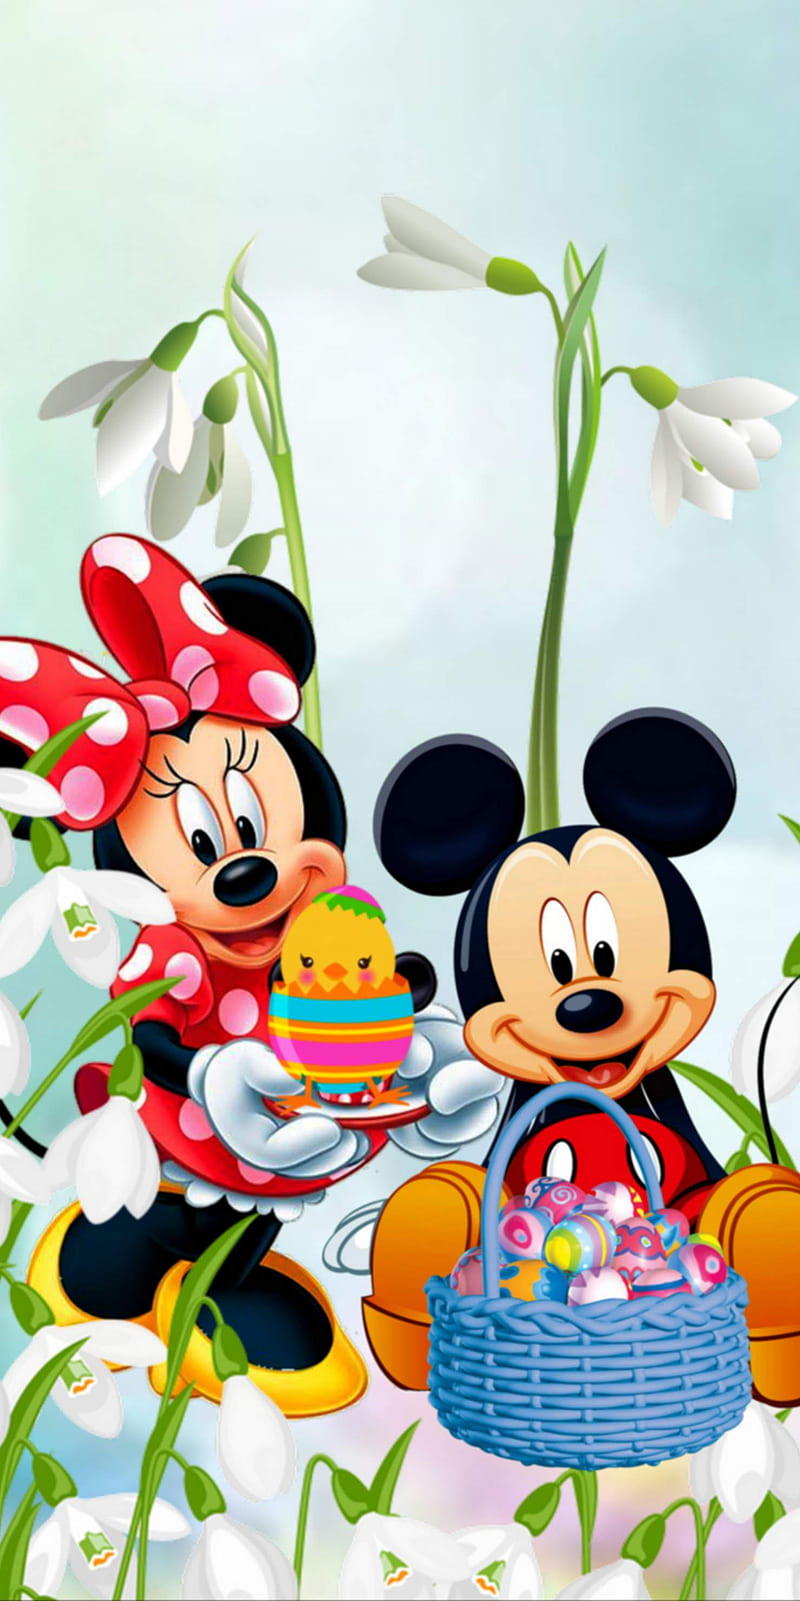 1440x2880px, disney, easter, eggs, happyeaster, mickey mouse, HD ...